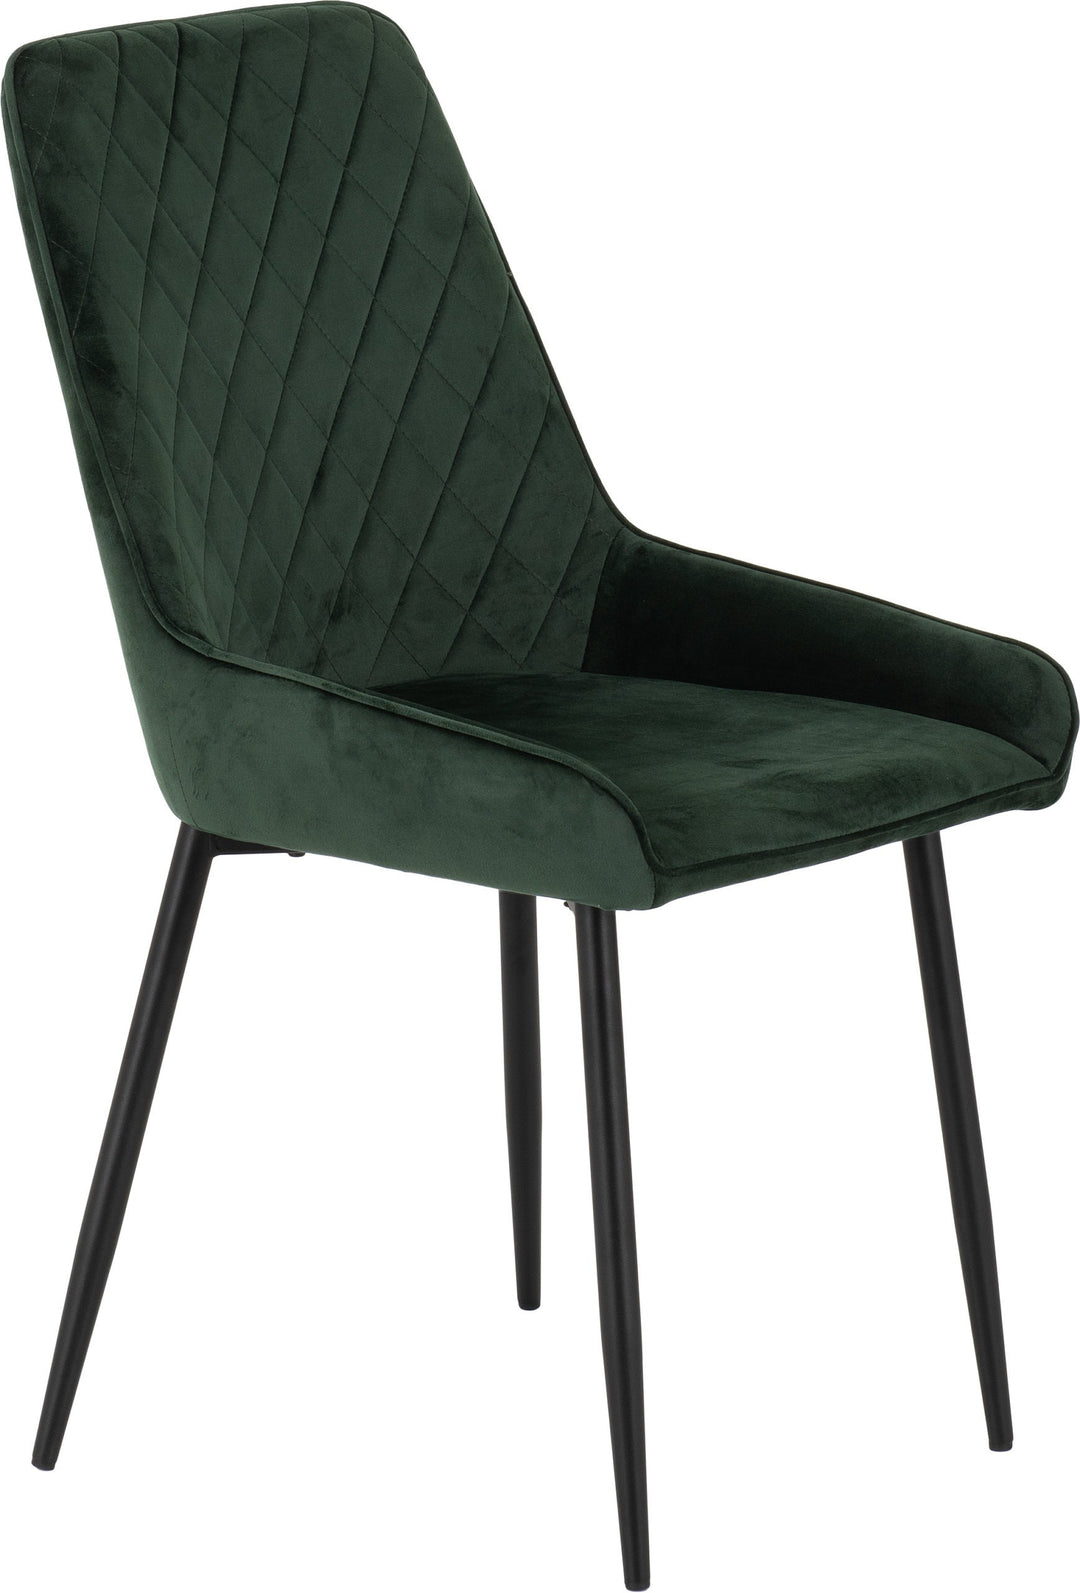 Athens Rect & Avery Dining Set (X4 Chairs) - Concrete/Emerald Green Velvet